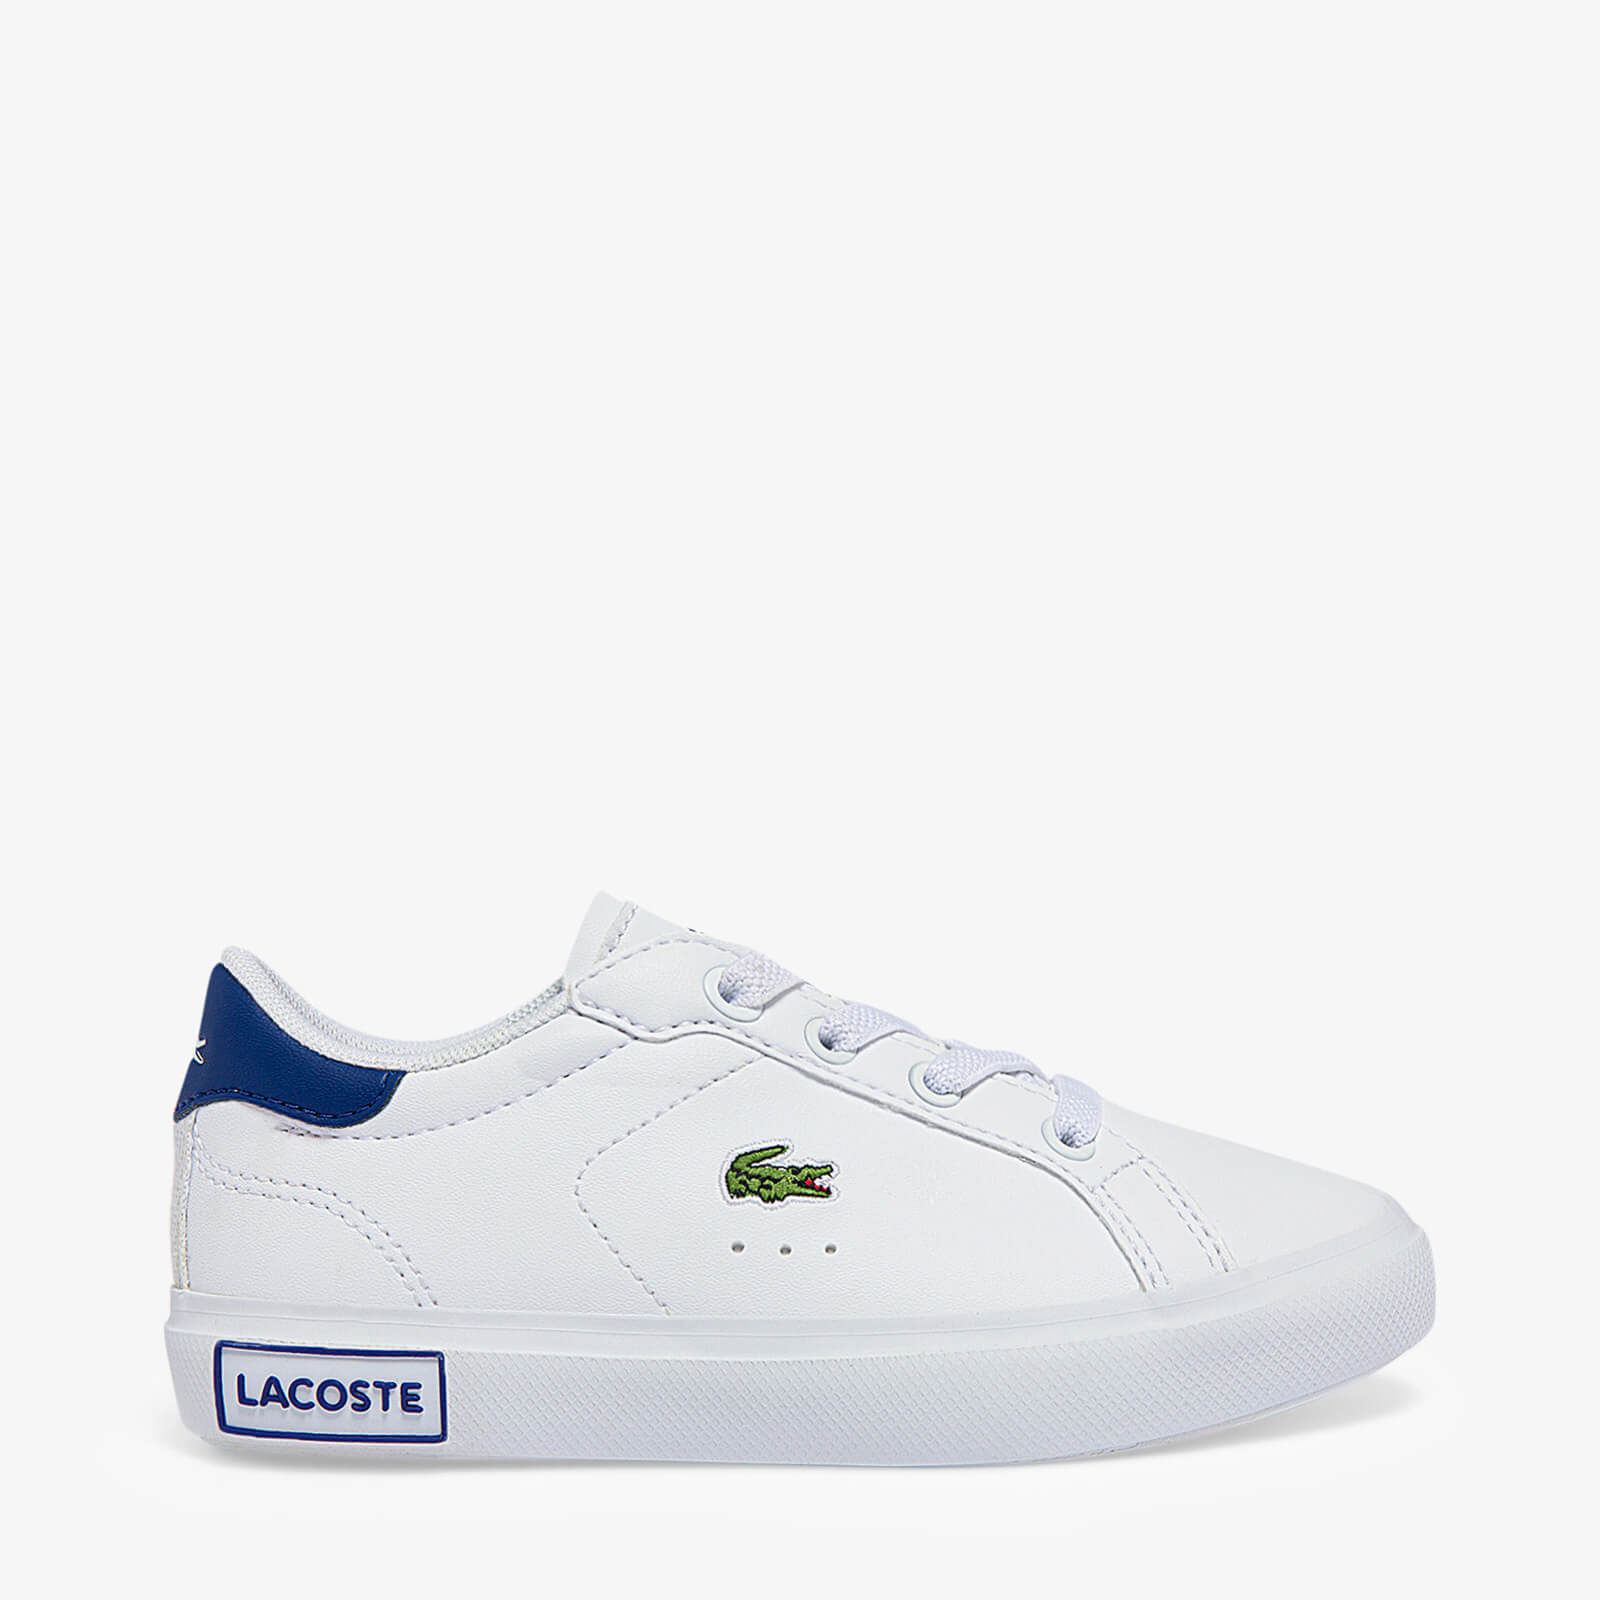 Lacoste Infant Powercourt Trainers - White/Blue - UK 5 Toddler